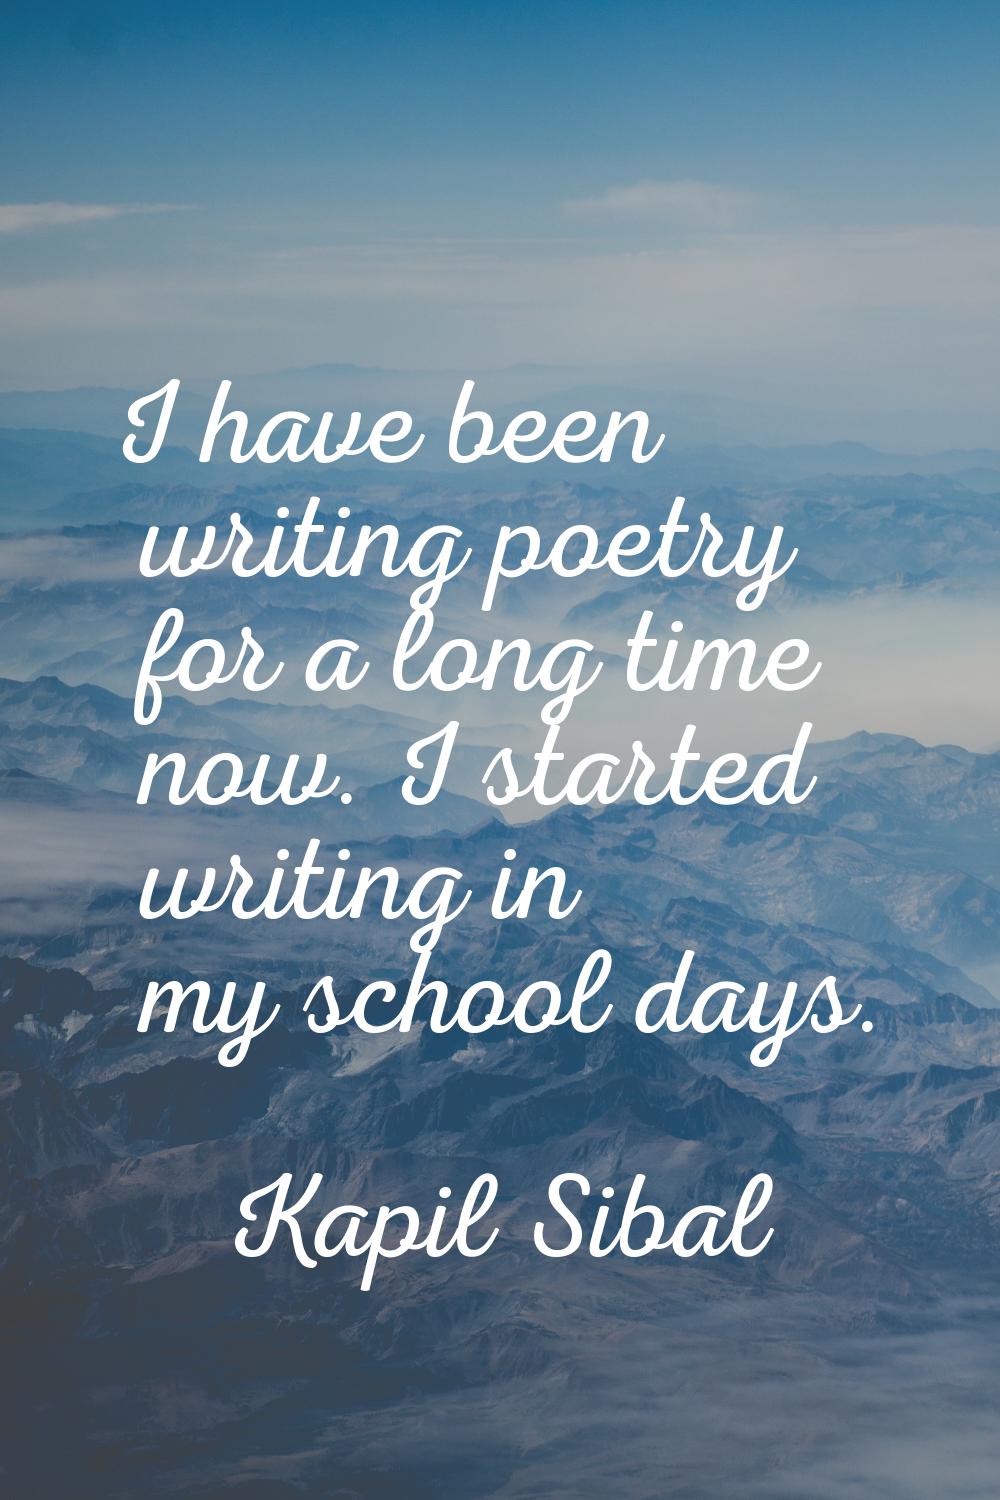 I have been writing poetry for a long time now. I started writing in my school days.